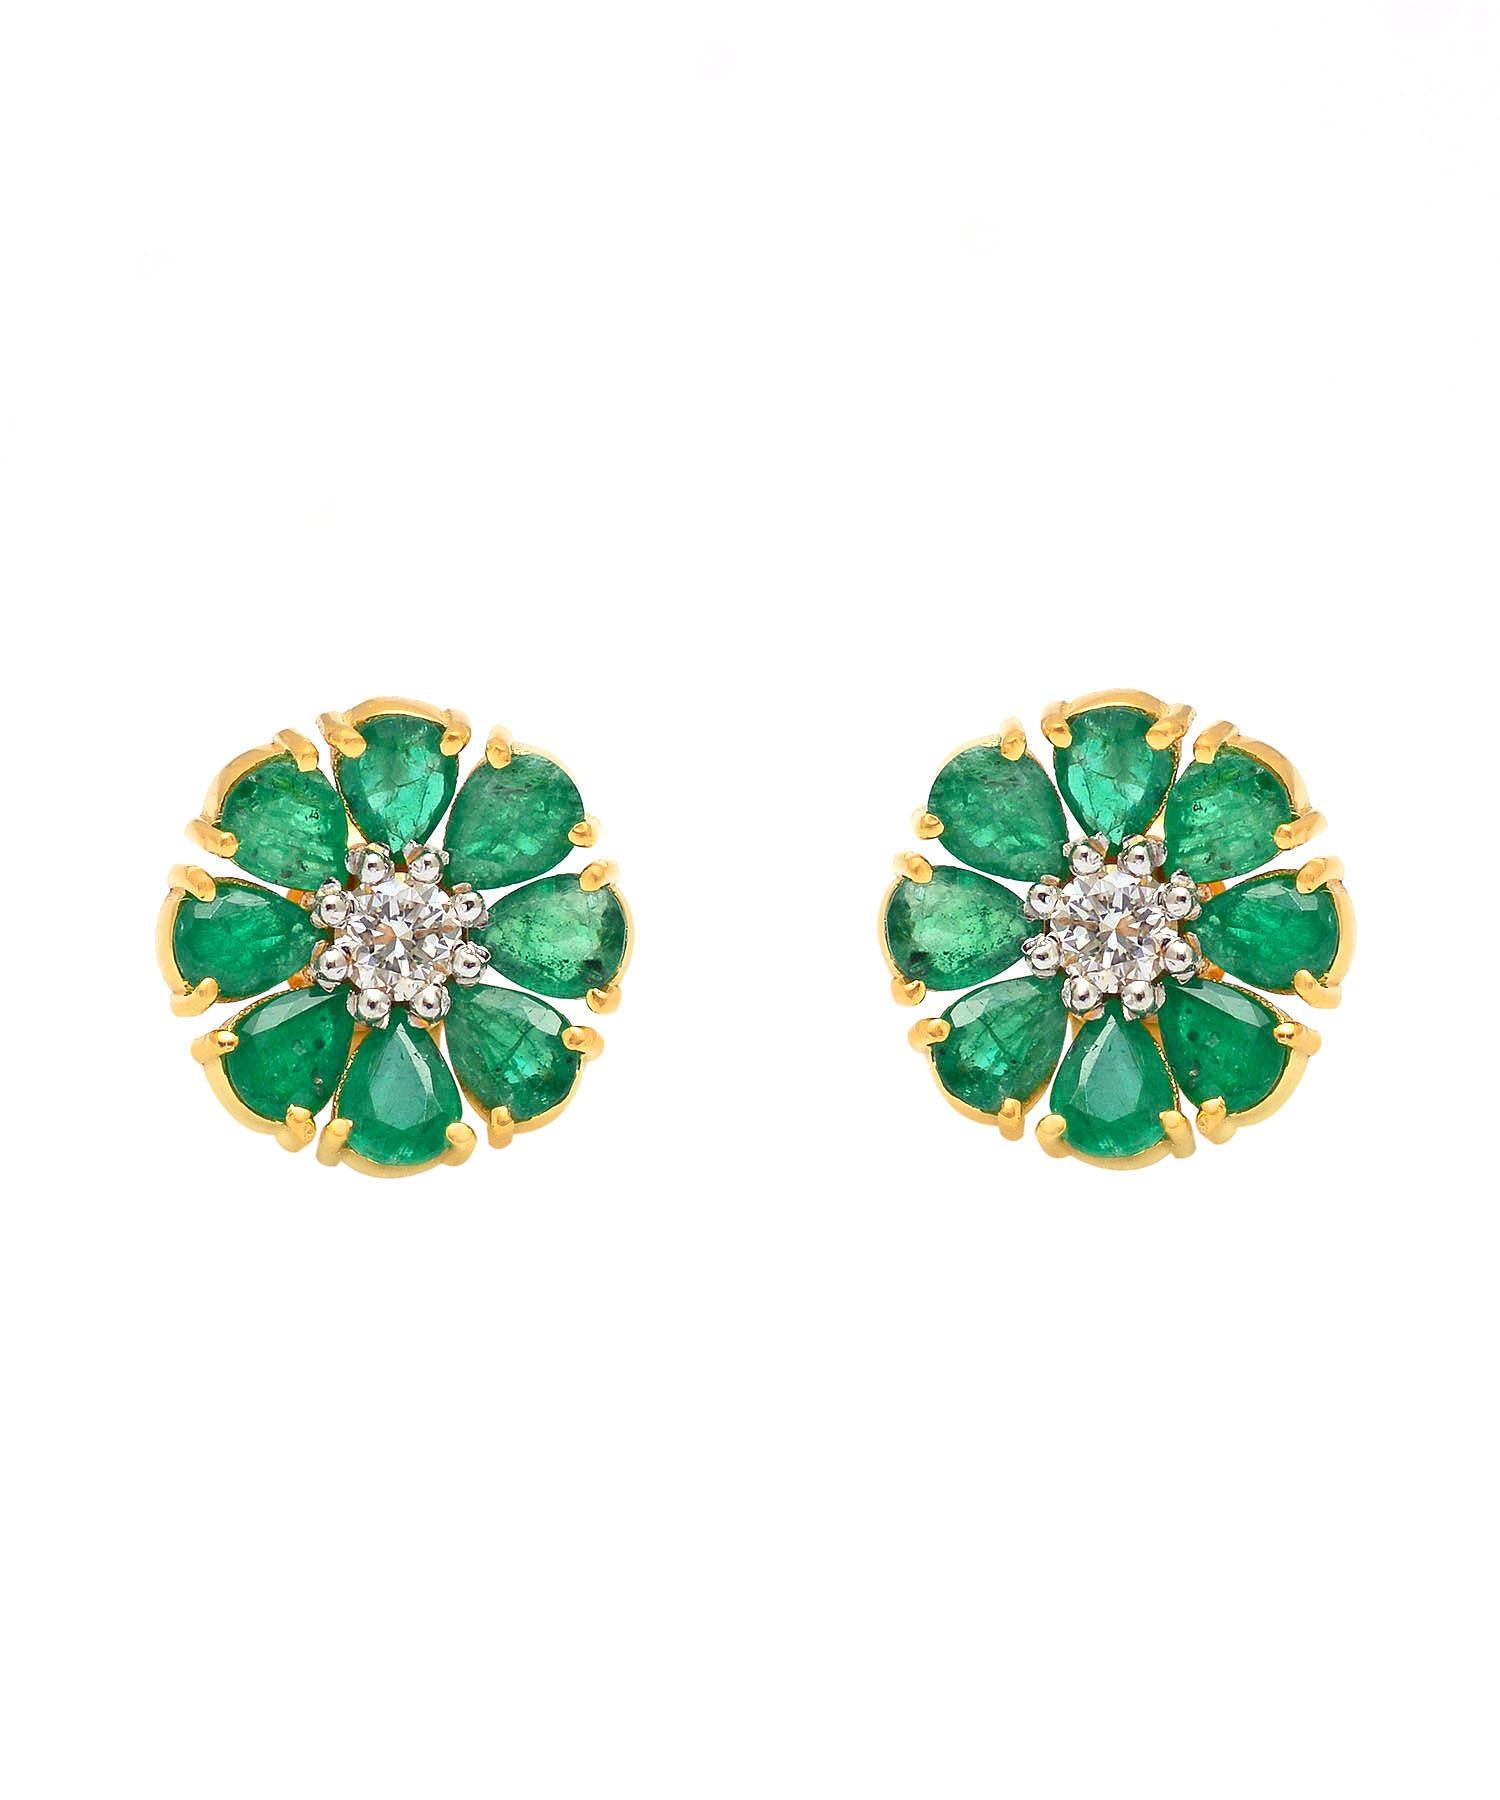 Brilliant Cut Emerald Stud Earrings with Diamond in 18k Gold For Sale